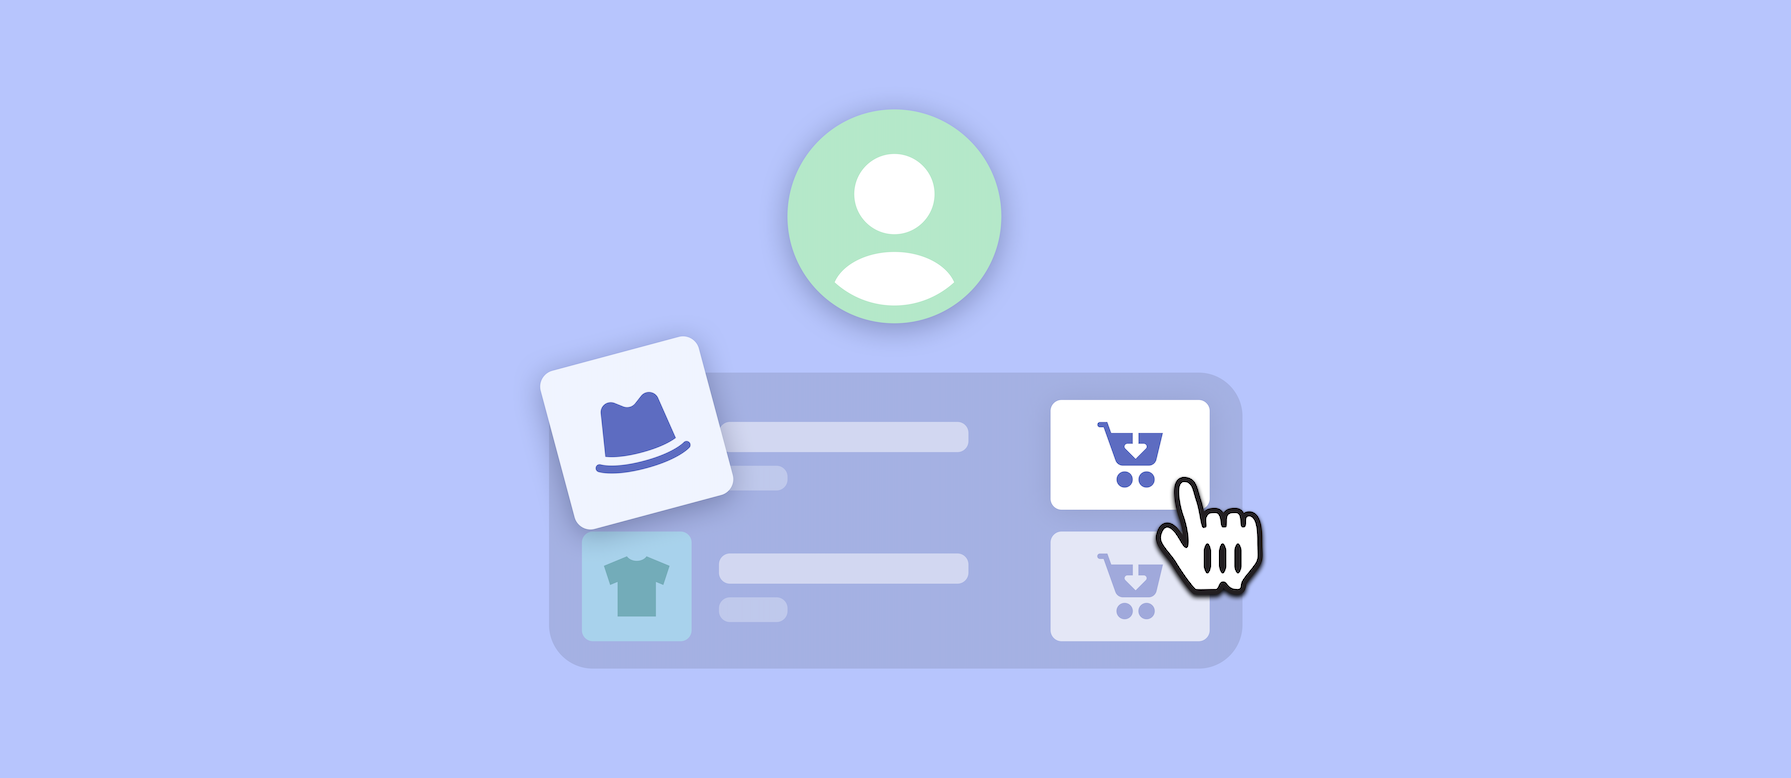 Using Gifting to Drive Ecommerce Sales on Shopify